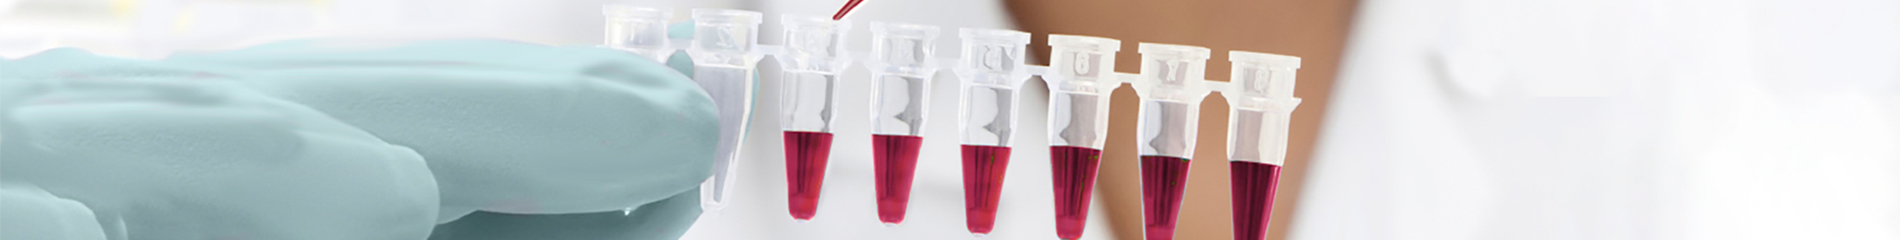 Sample tubes being filled by a pipette